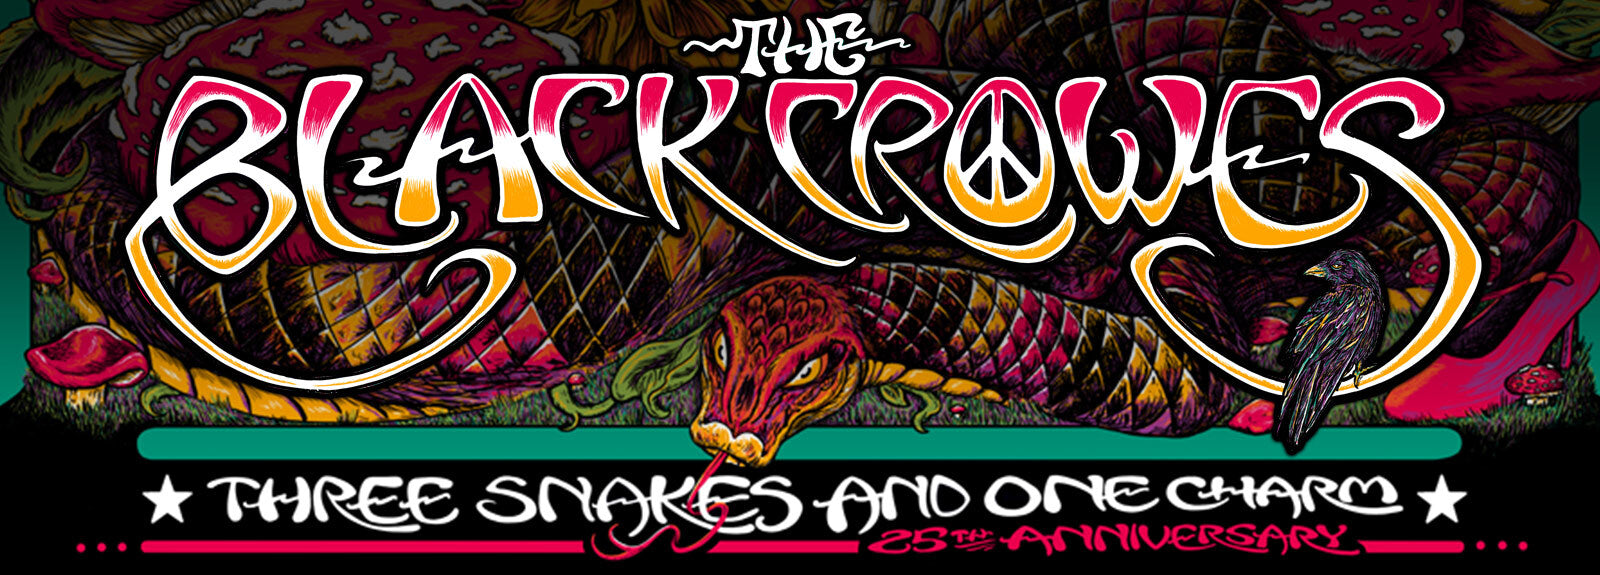 The Black Crowes Three Snakes and One Charm 25th Anniversary